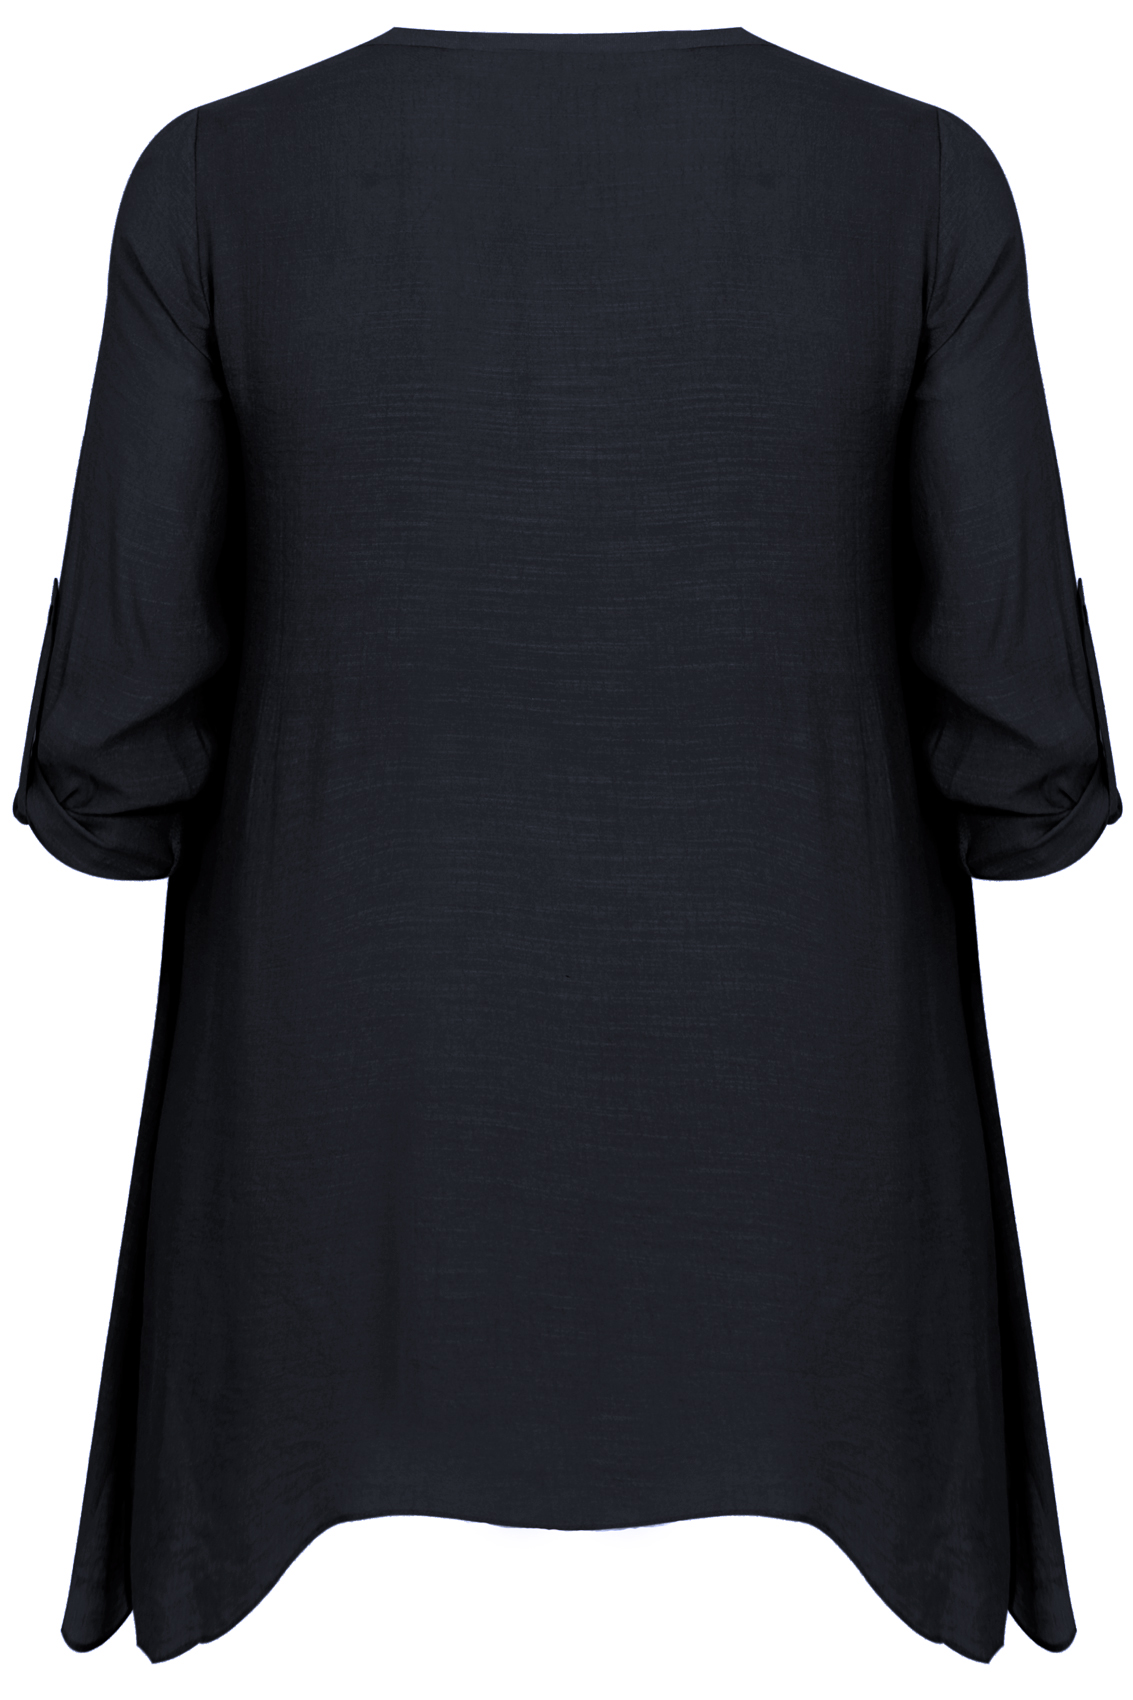 Black Layered Blouse With Notch Neck & Dipped Hem, Plus 